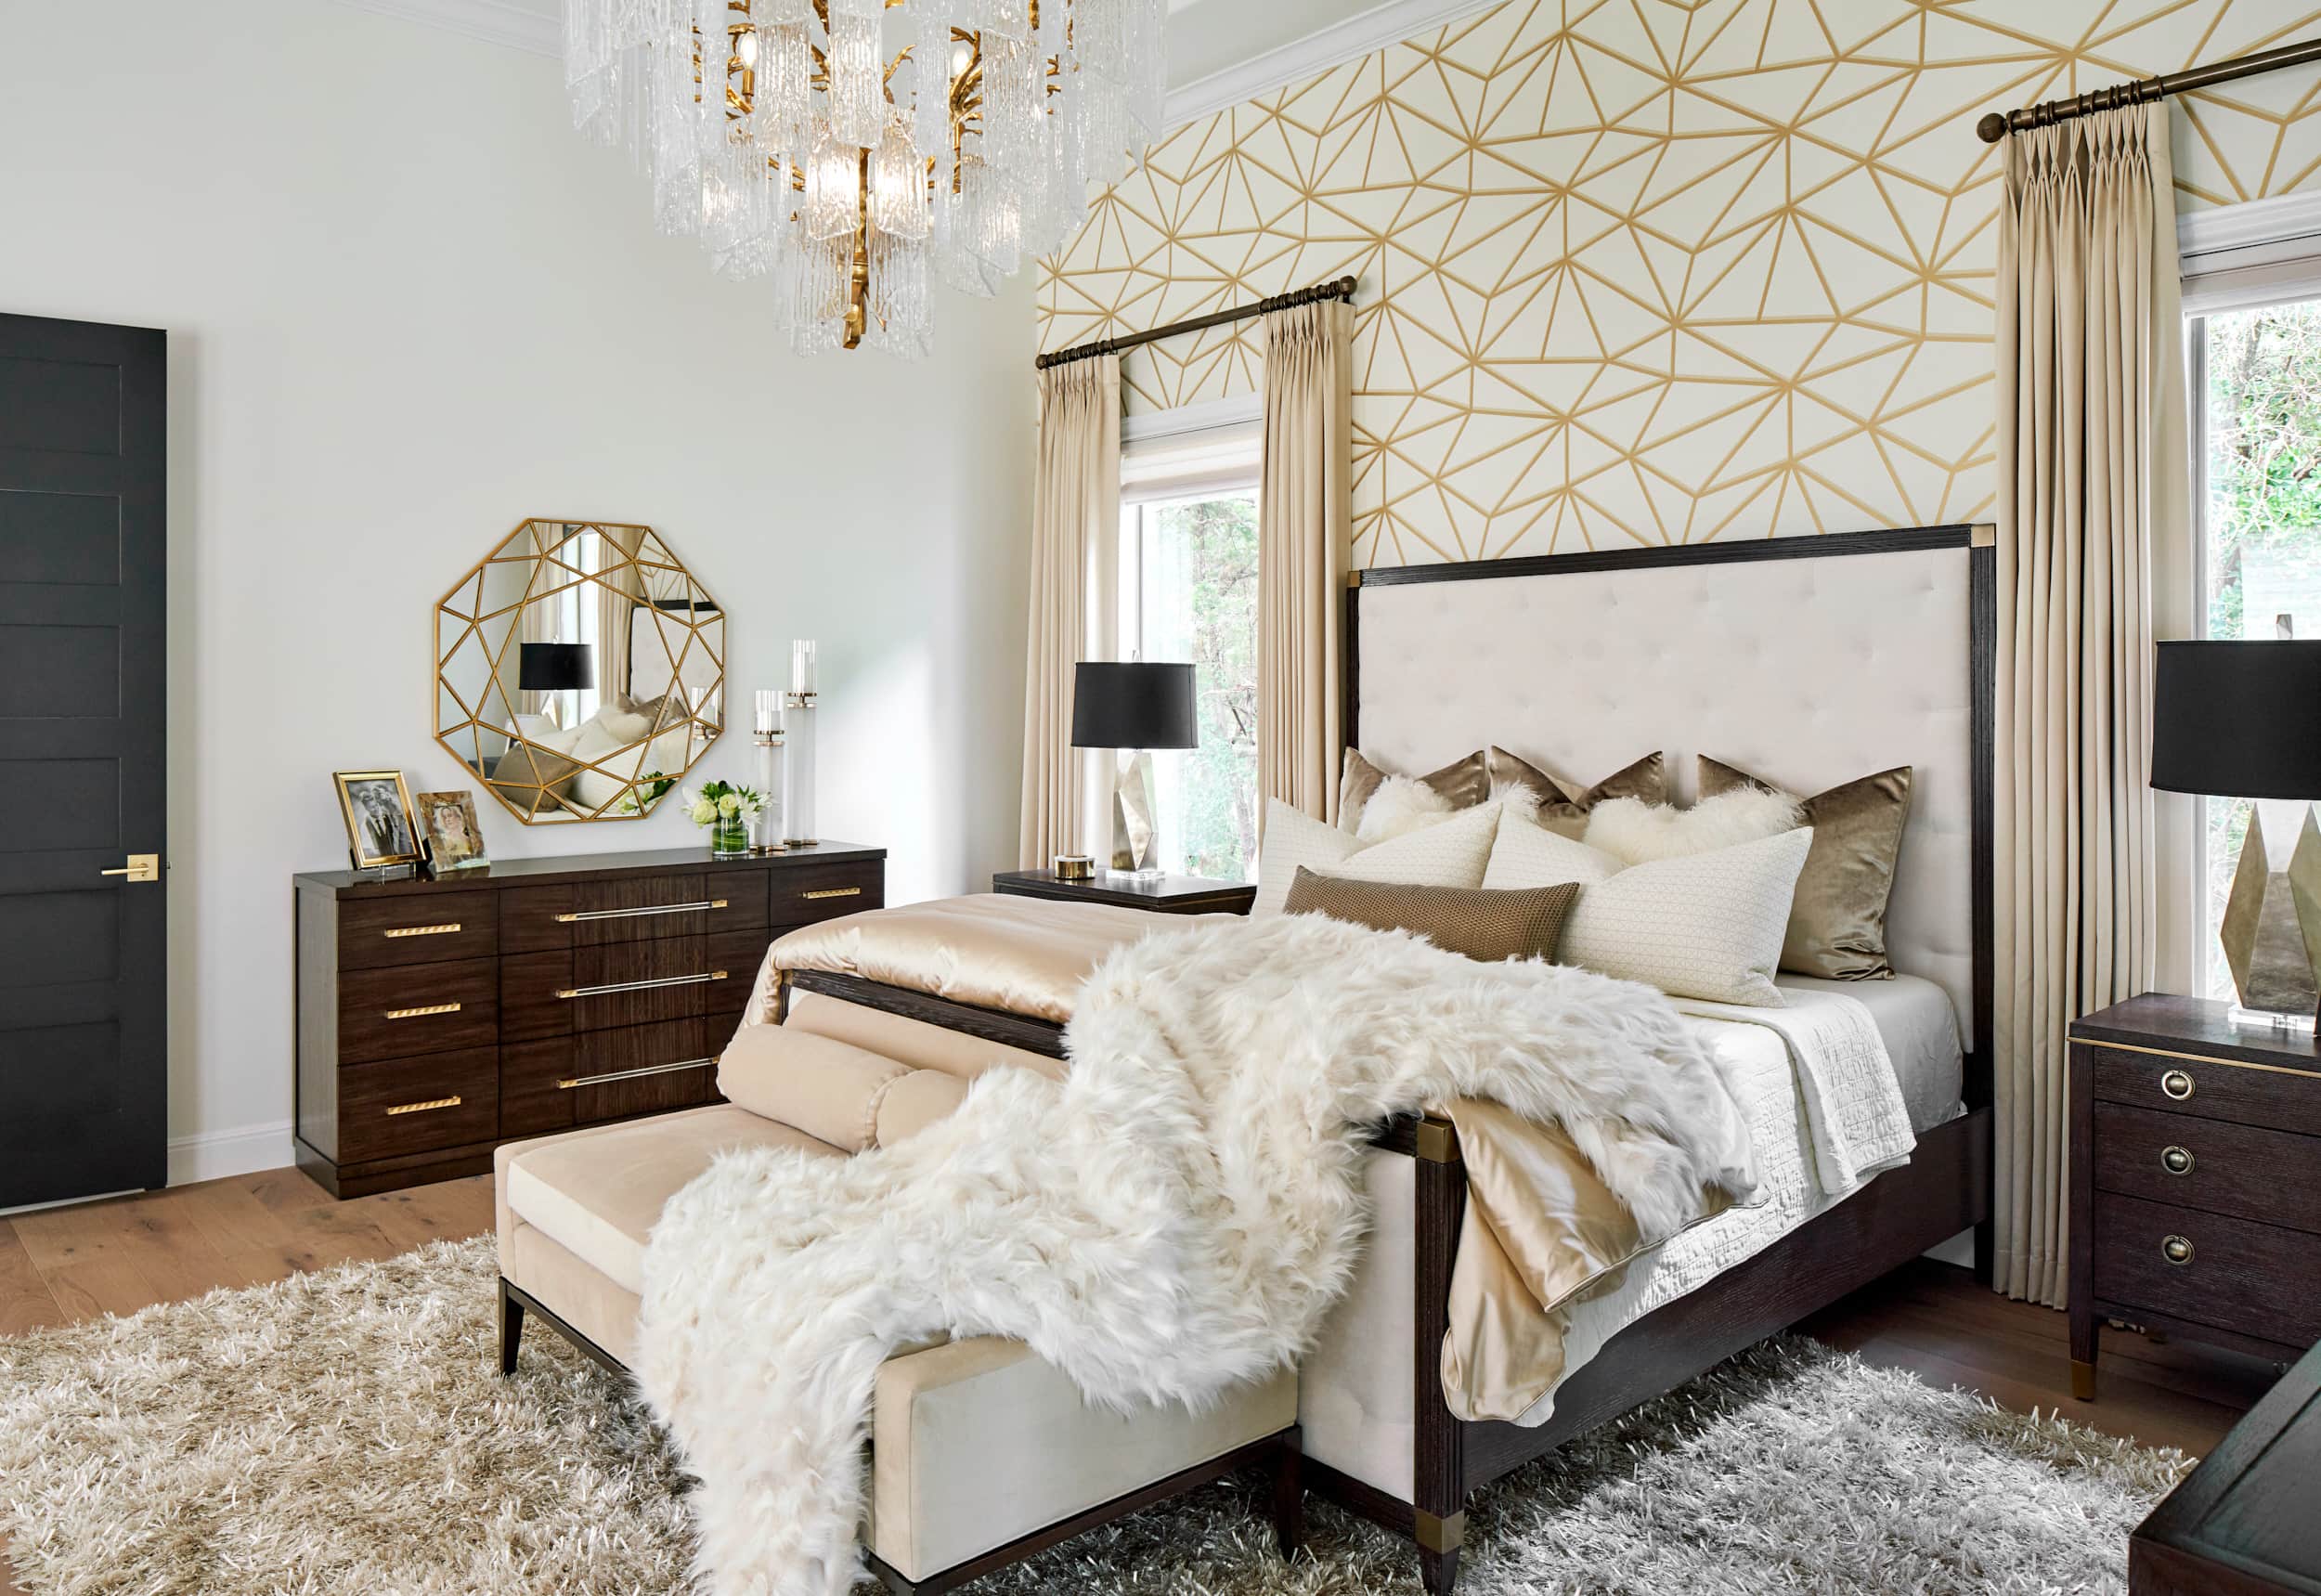 master-bedroom-white-gold-wallpaper-feature-wall-for-haven-design-and-construction-san-antonio-tx-wallpaper-installation